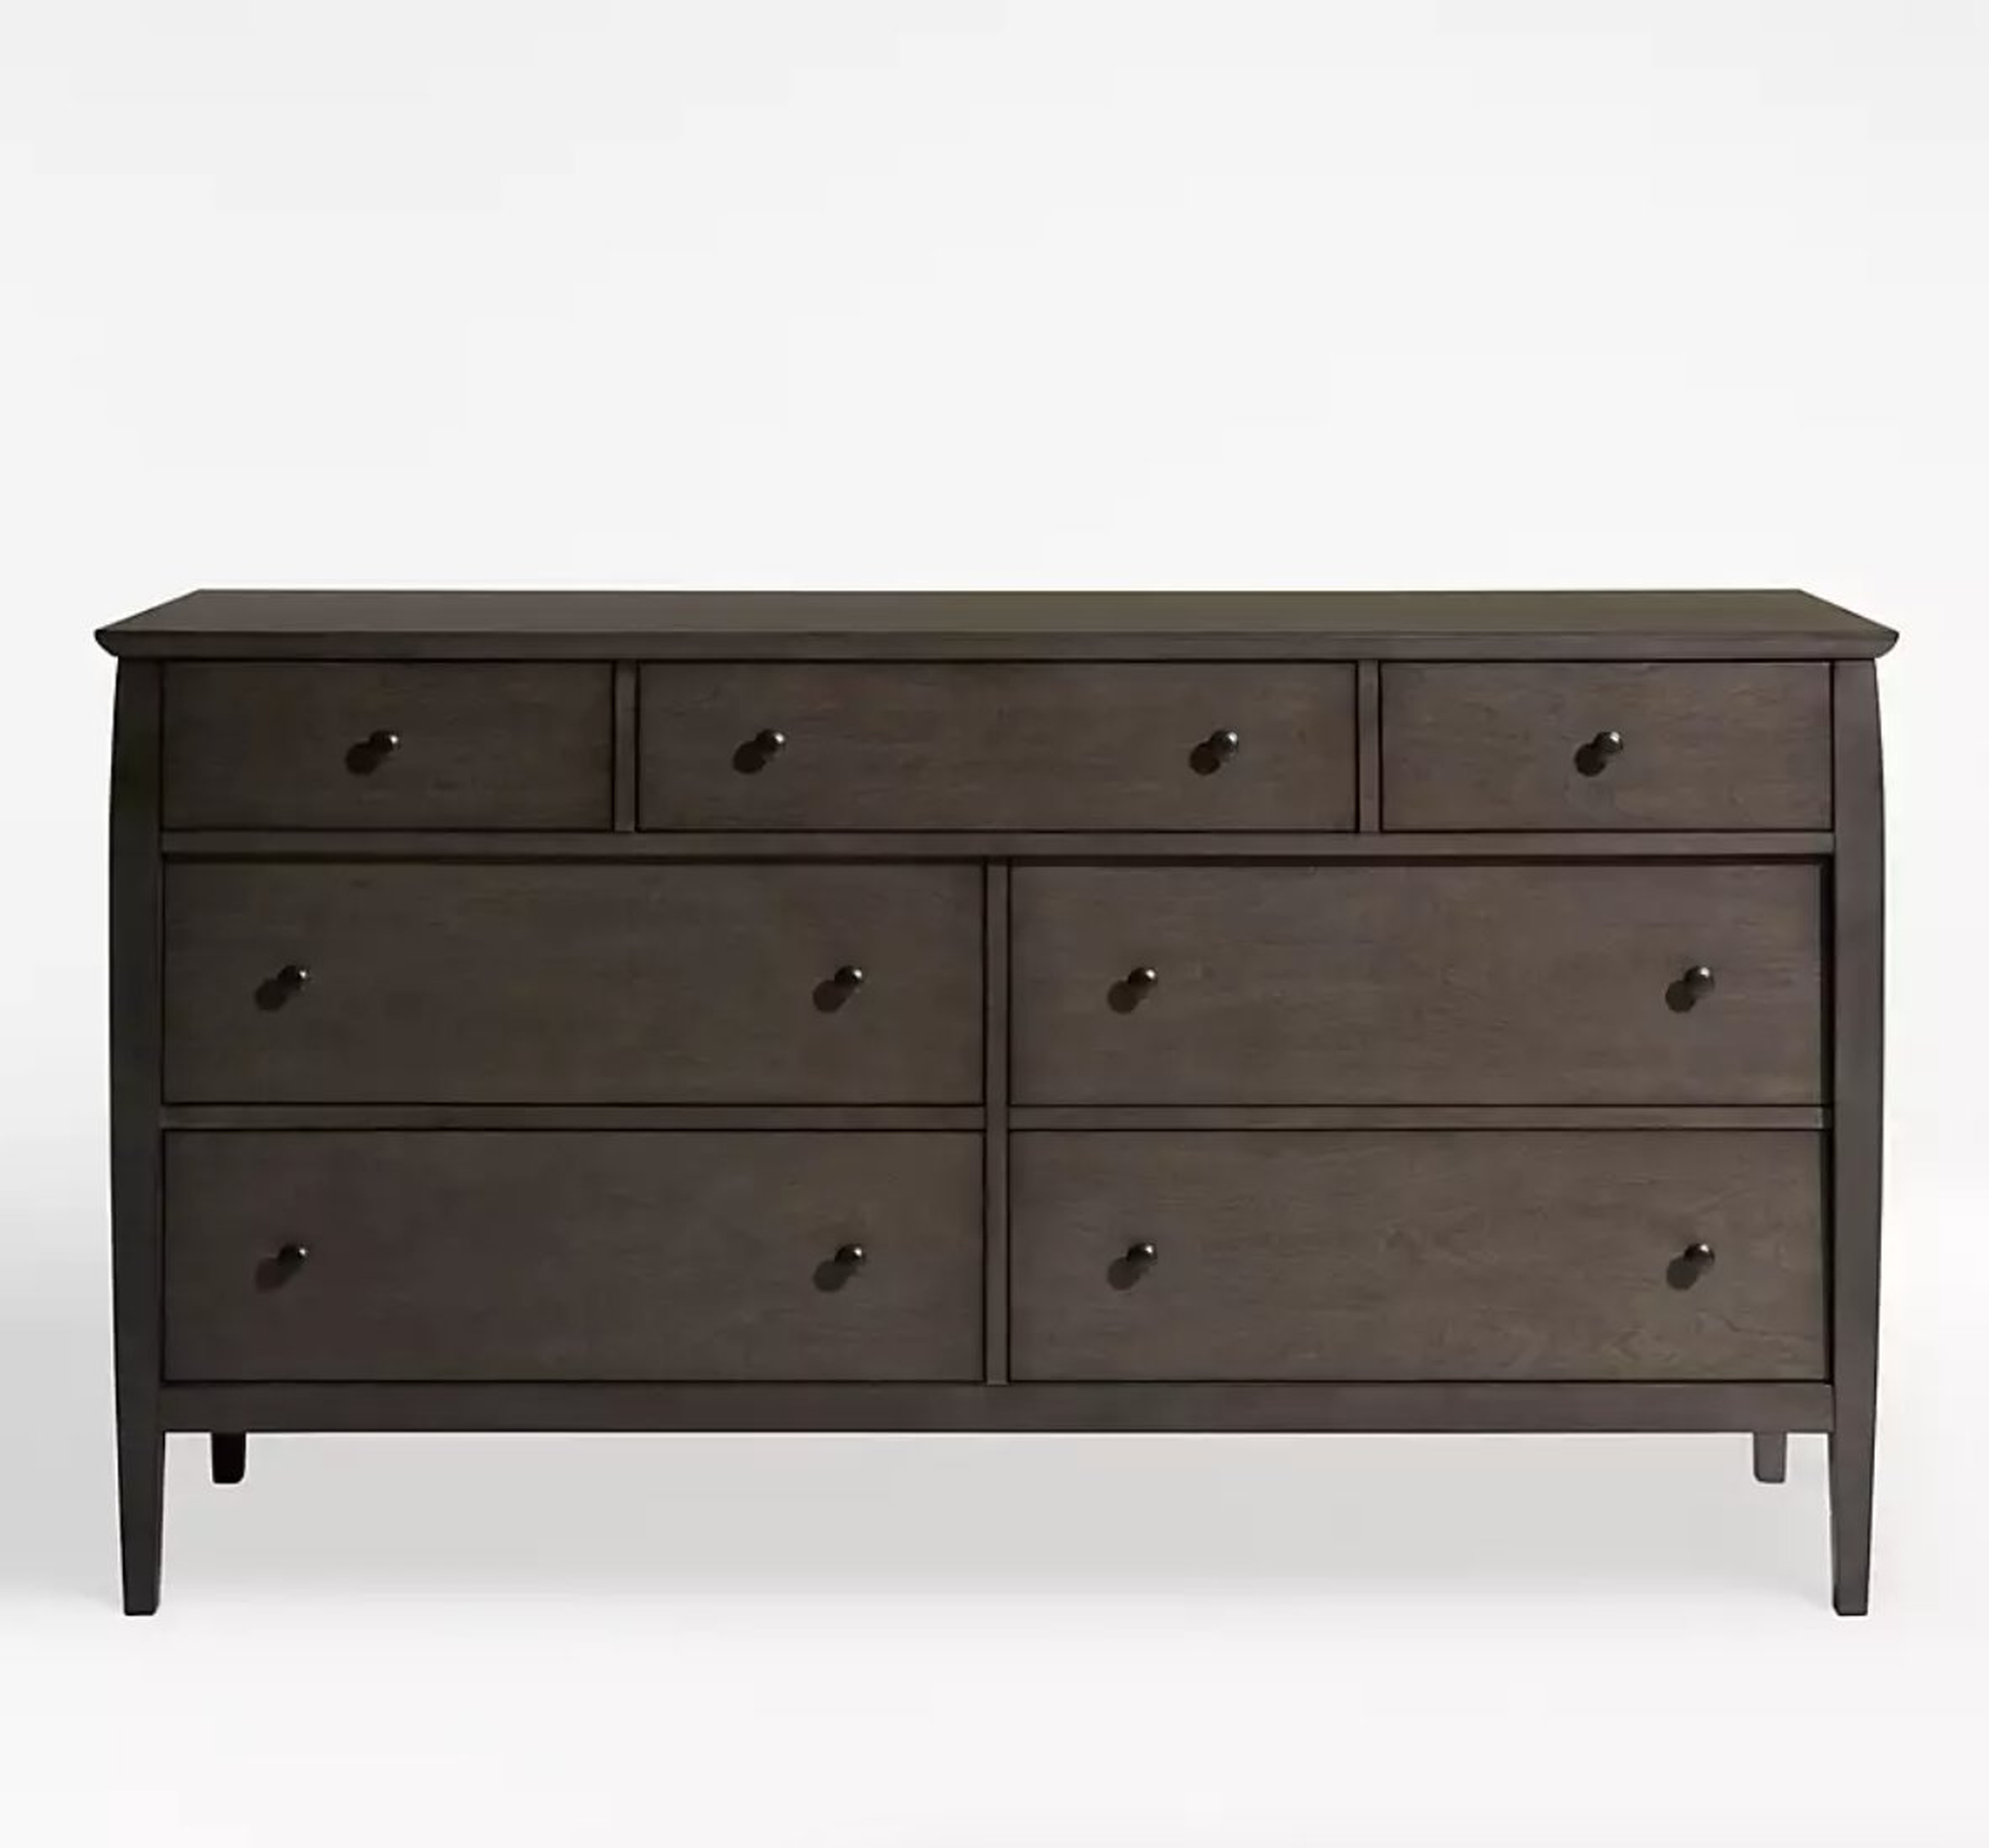 Mason 7-Drawer Dresser, Shadow Gray (Ships late April) - Crate and Barrel